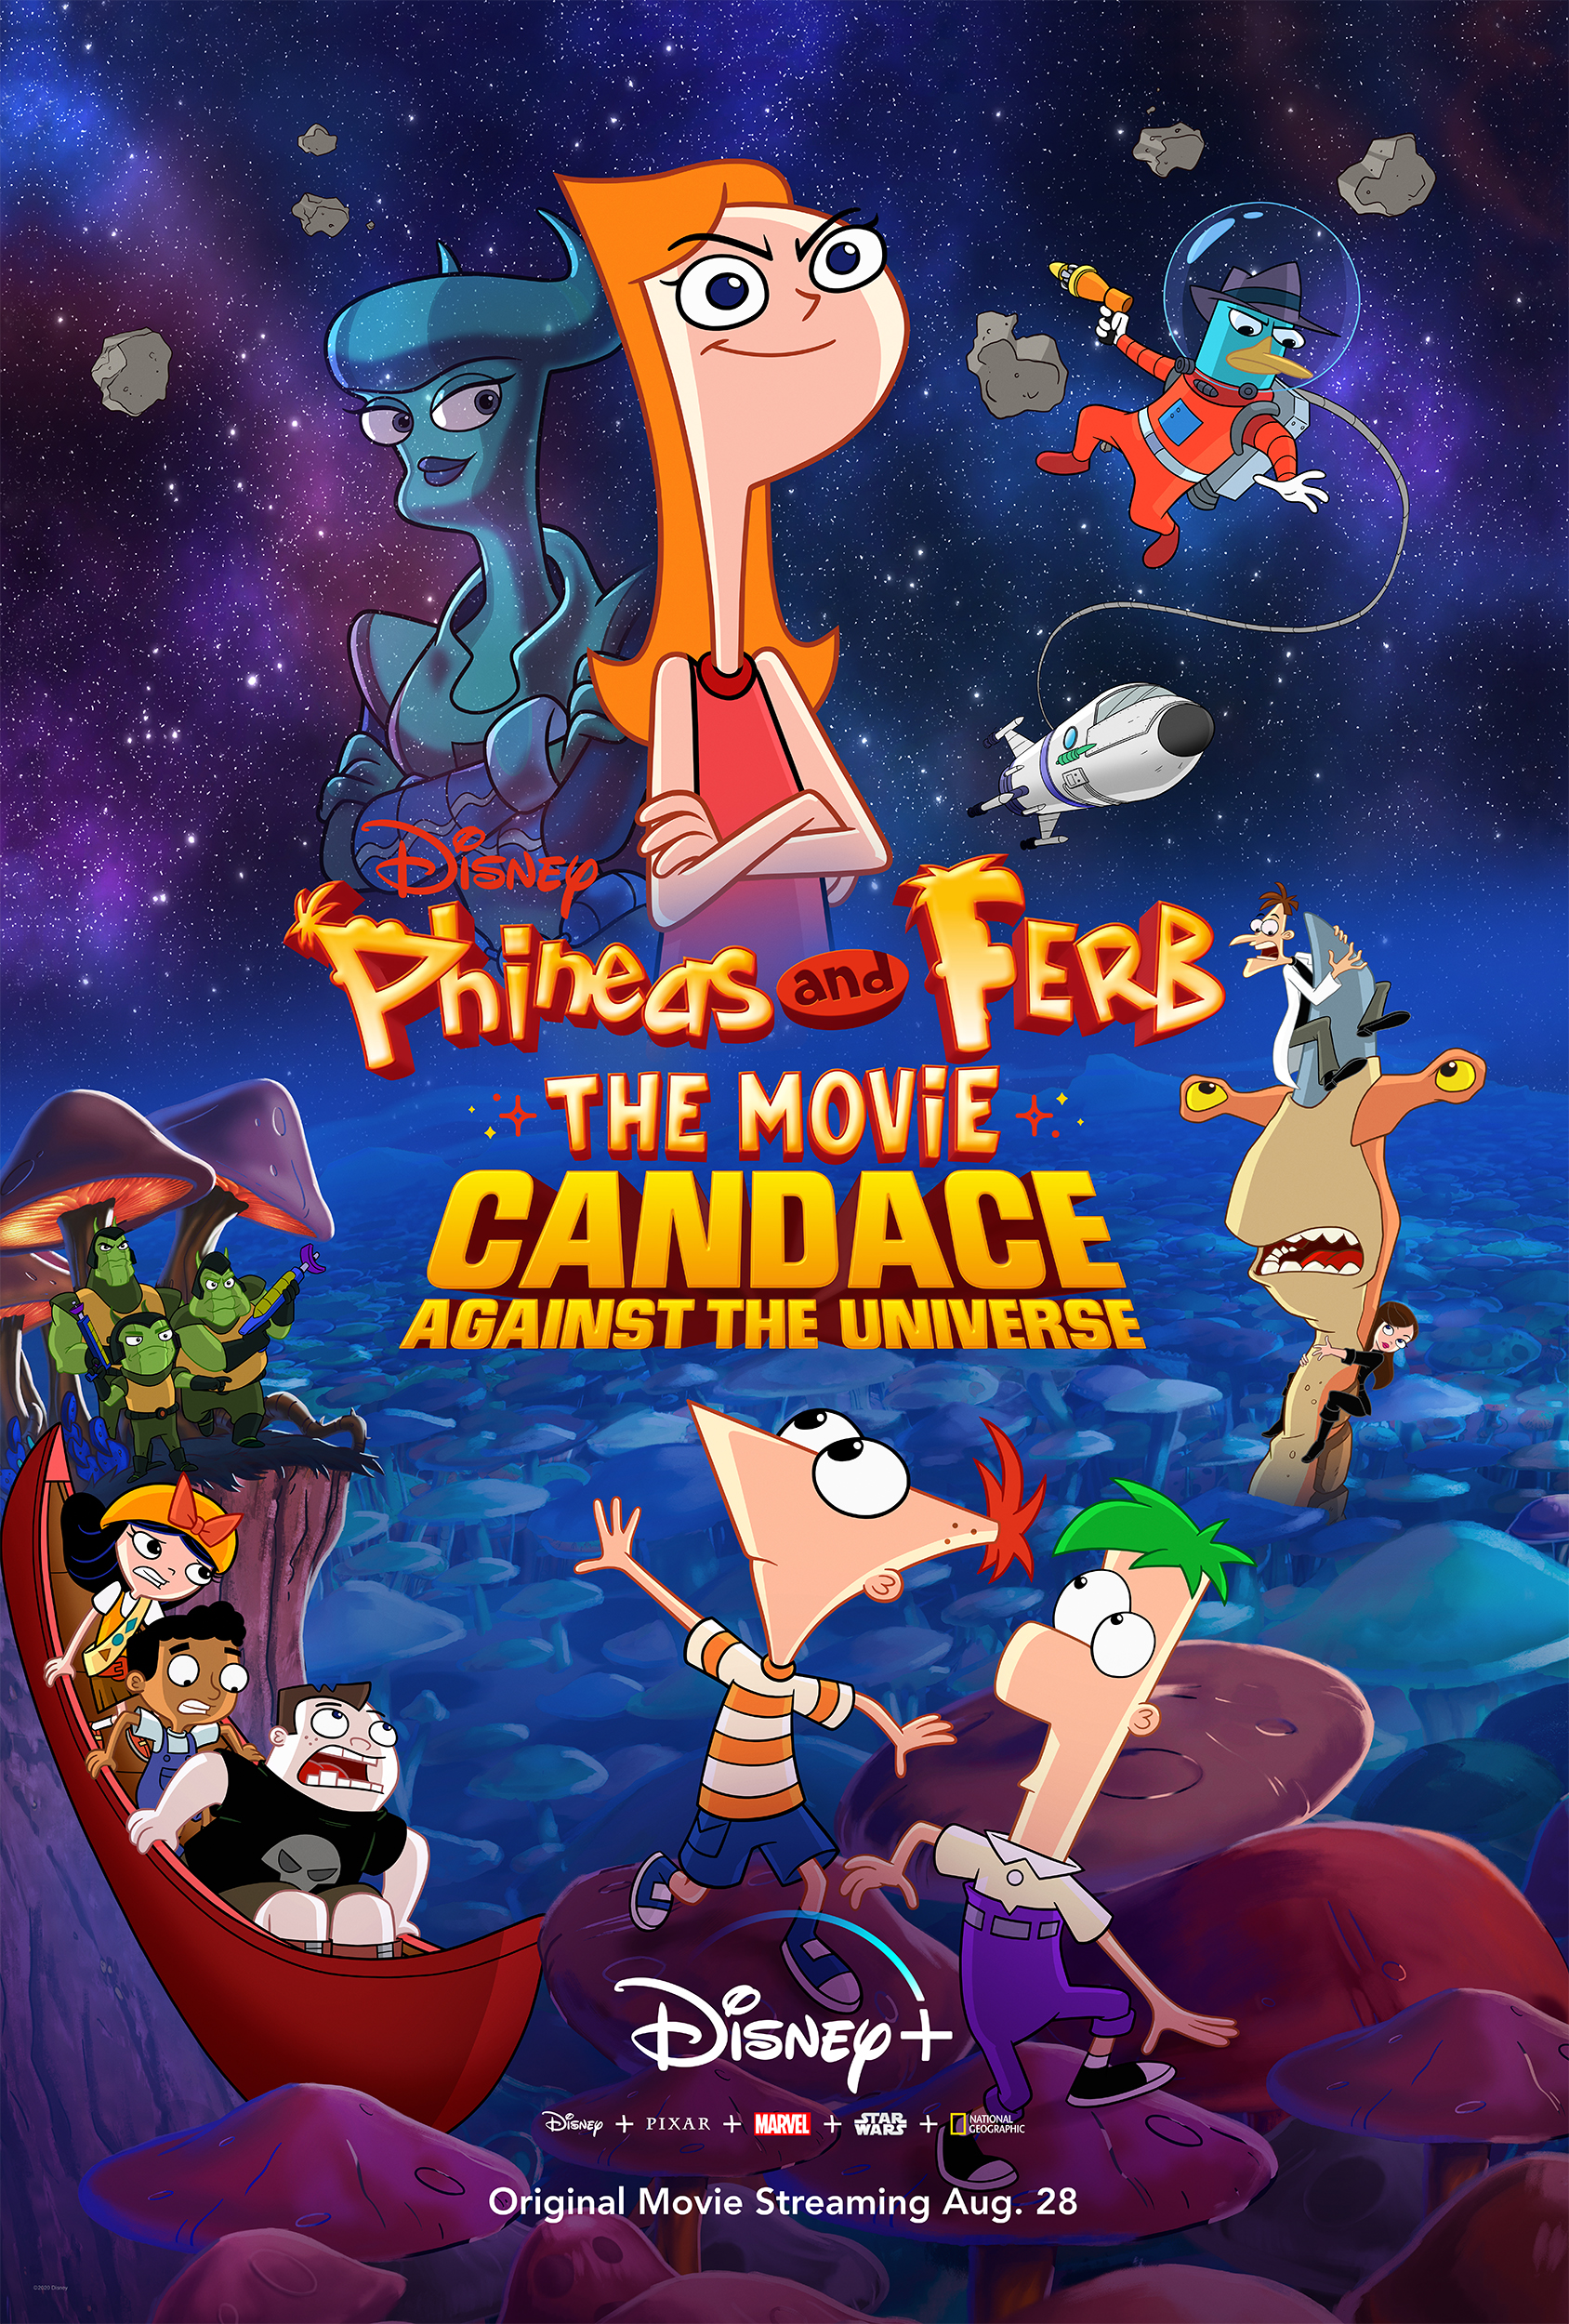 Phineas and Ferb the Movie- Candace Against the Universe (2020)